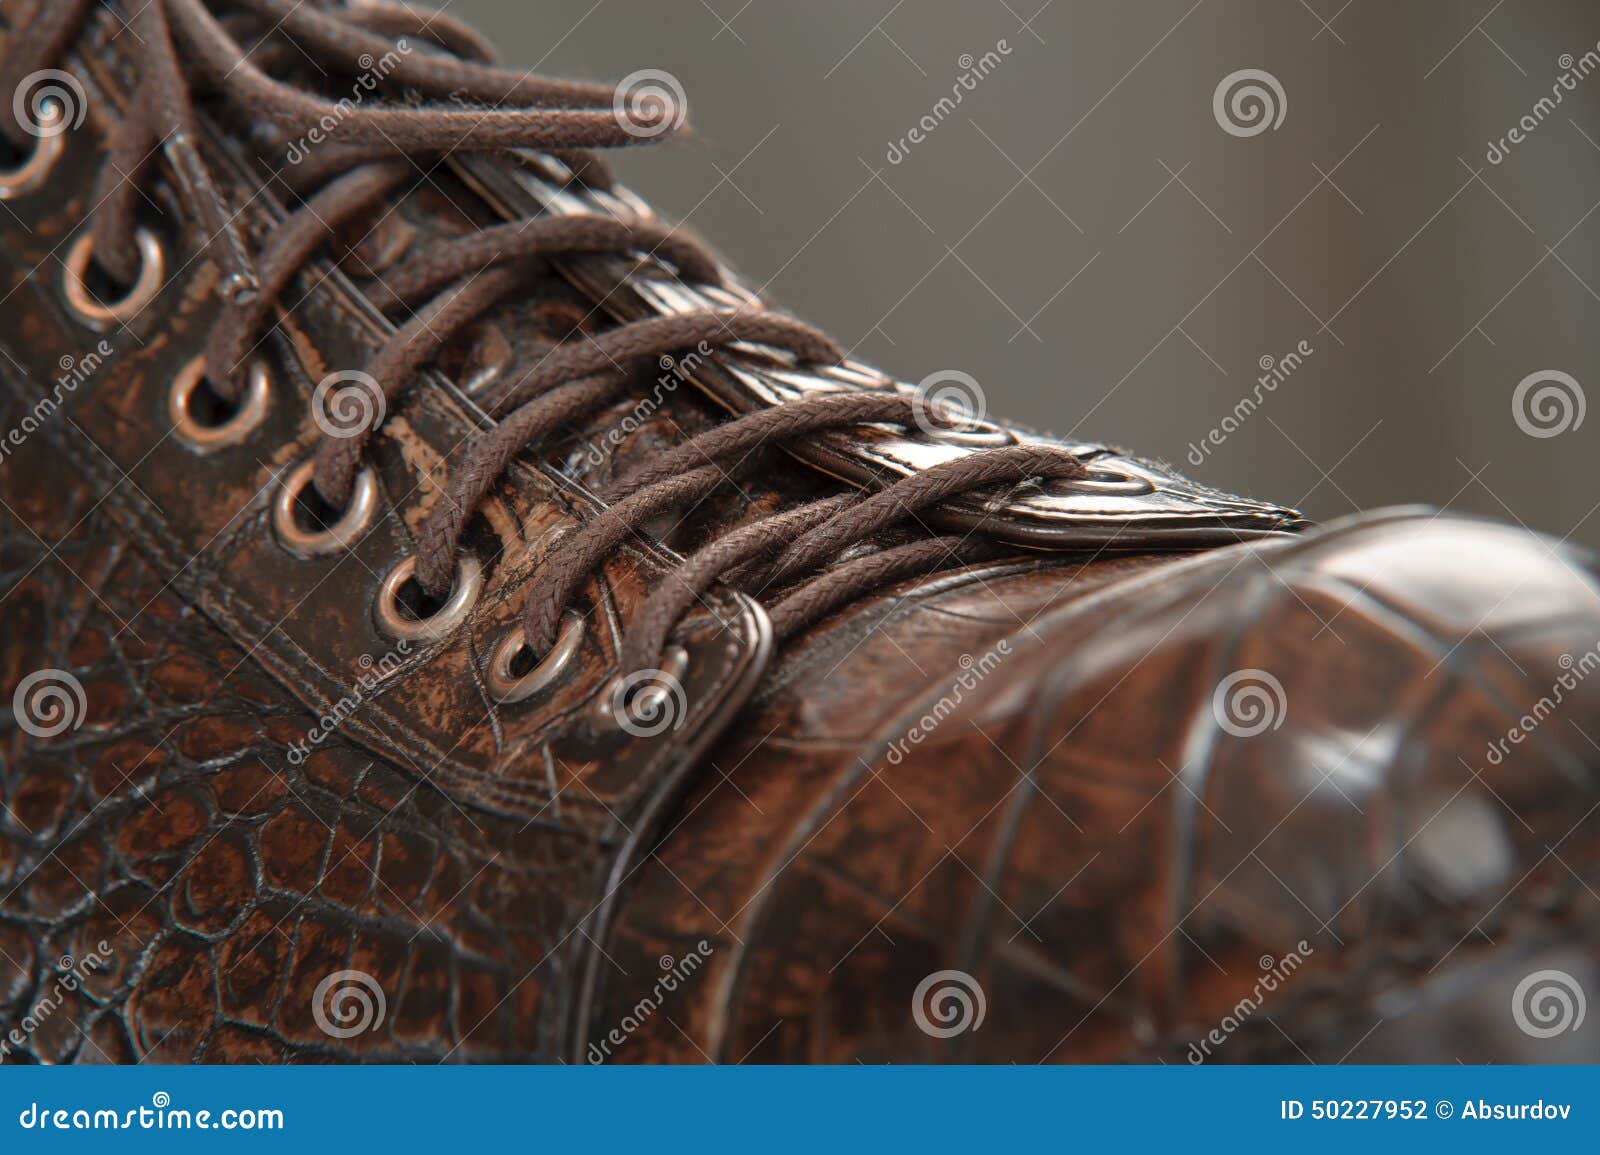 Men S Shoes Made from Crocodile Leather Laces Stock Photo - Image of ...